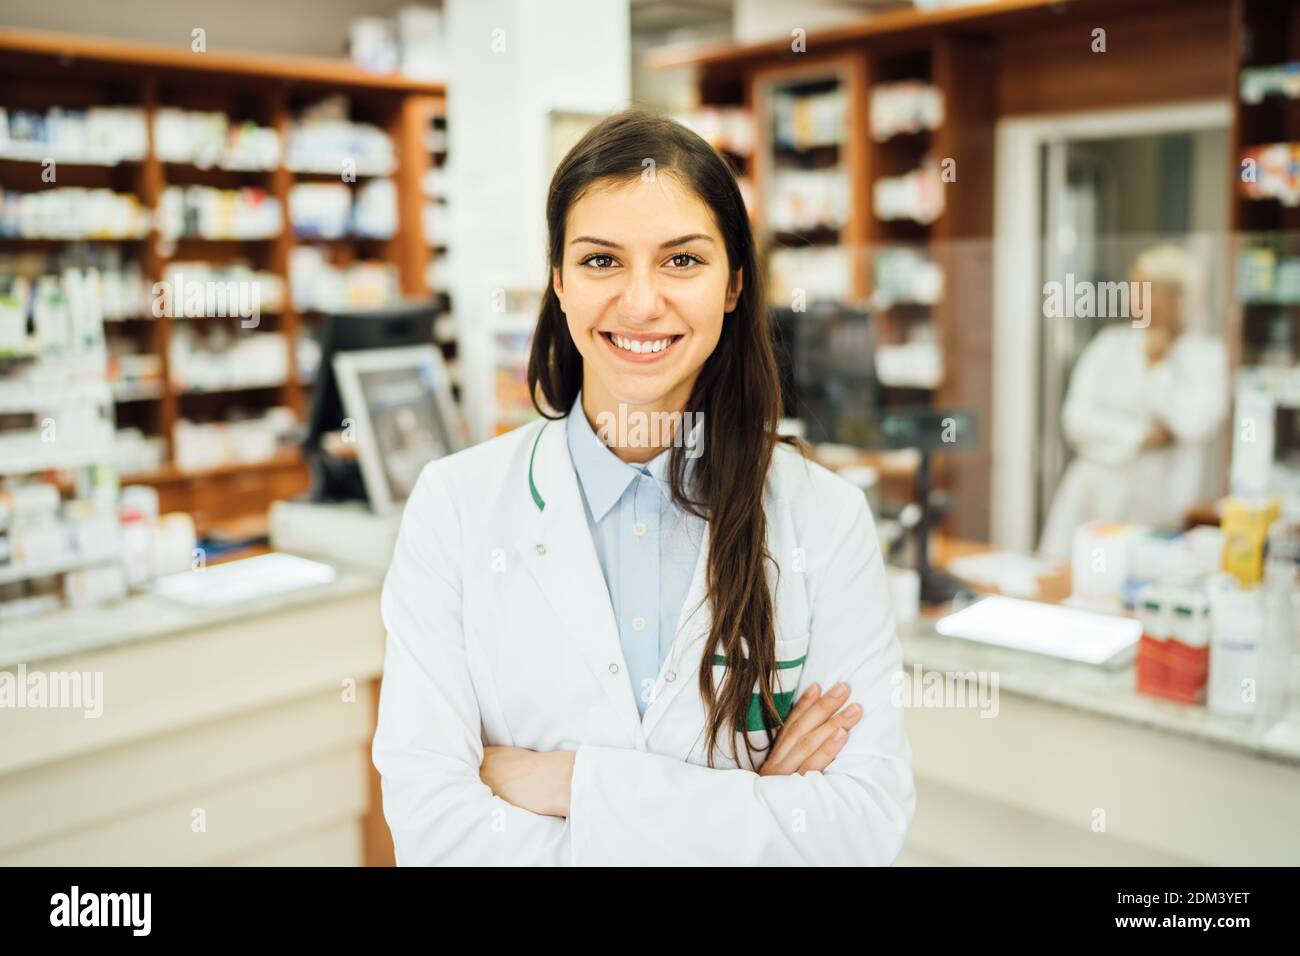 Smiling friendly pharmacist at the counter working in a pharmacy store. Pharmaceutical professional therapy recommendation. Giving advice about medica Stock Photo